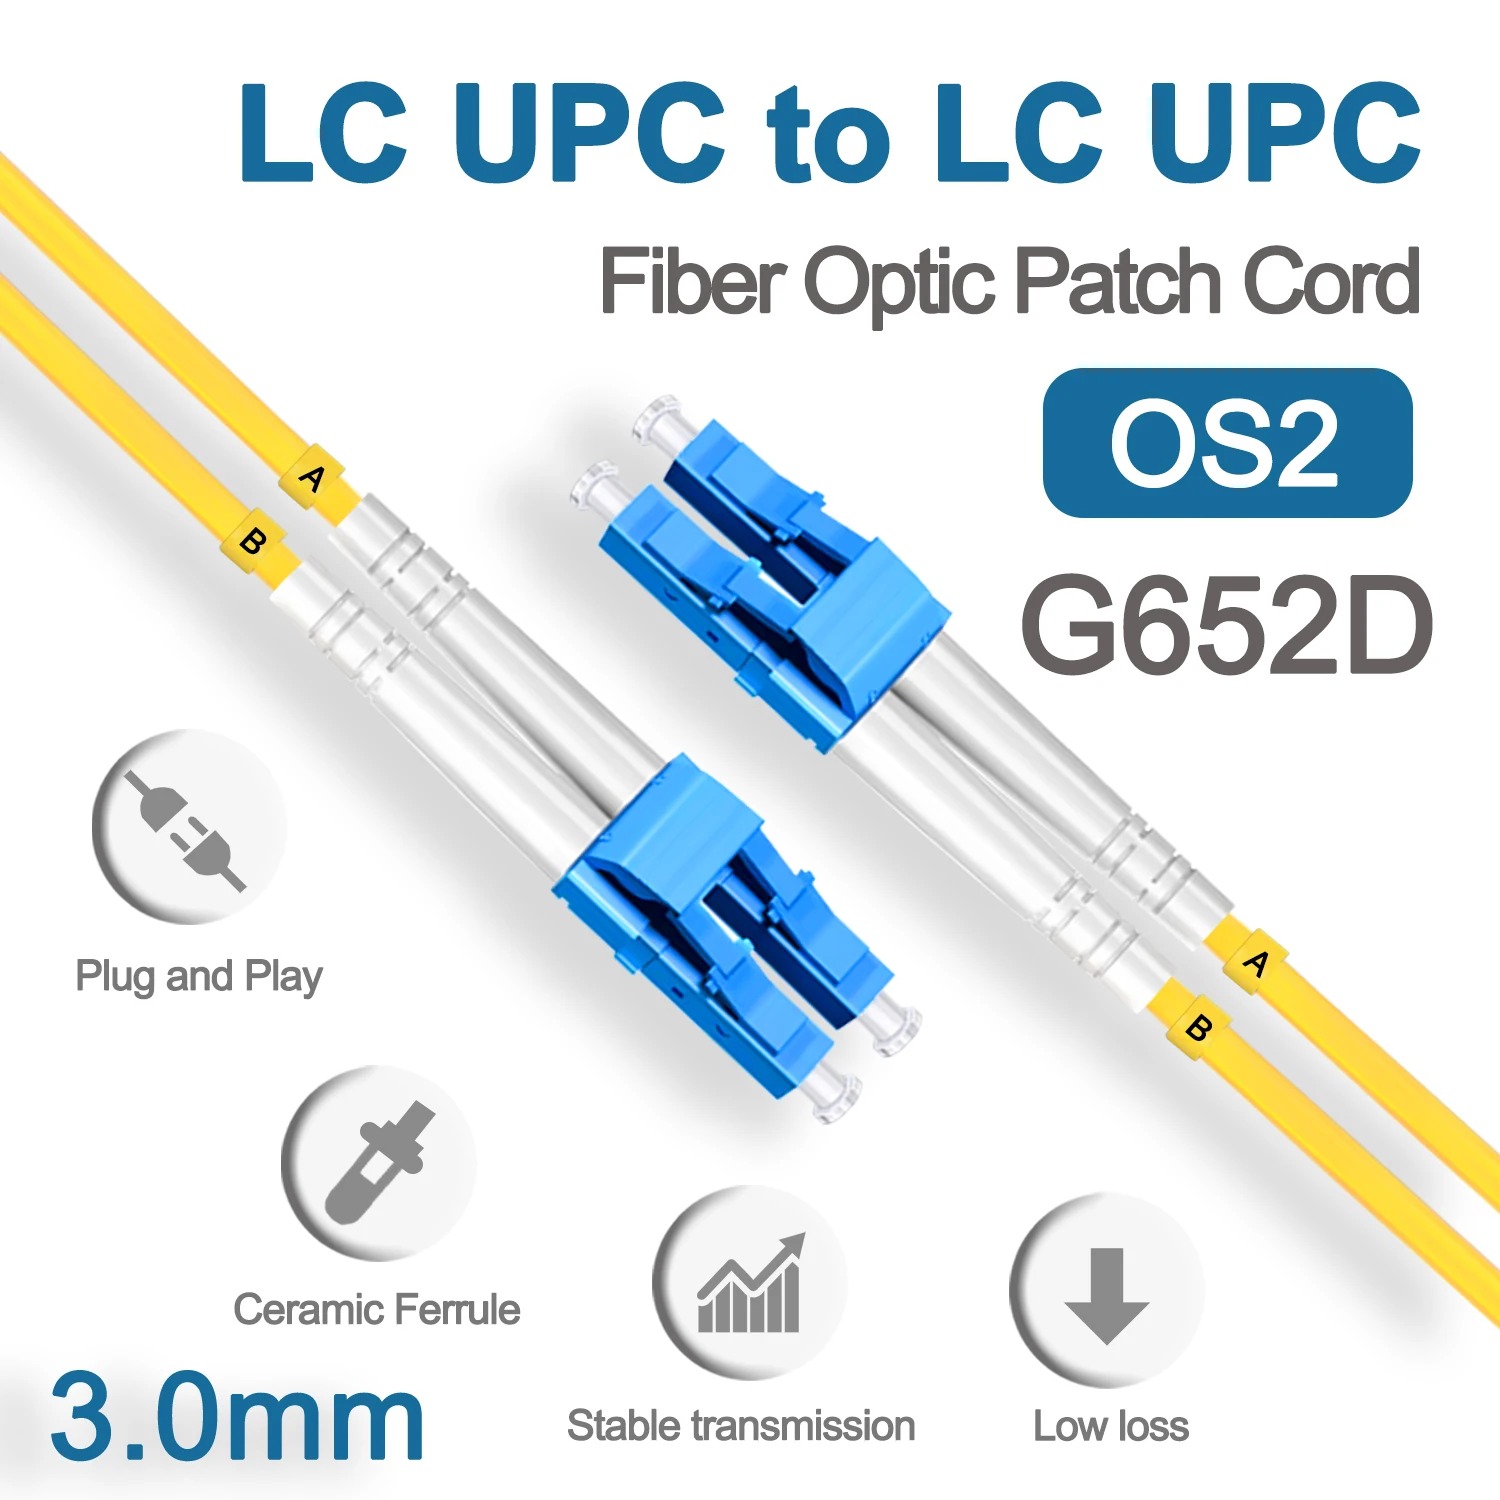 High-Performance LC UPC Fiber Optical Patch Jumper for FTTH and Data Centers